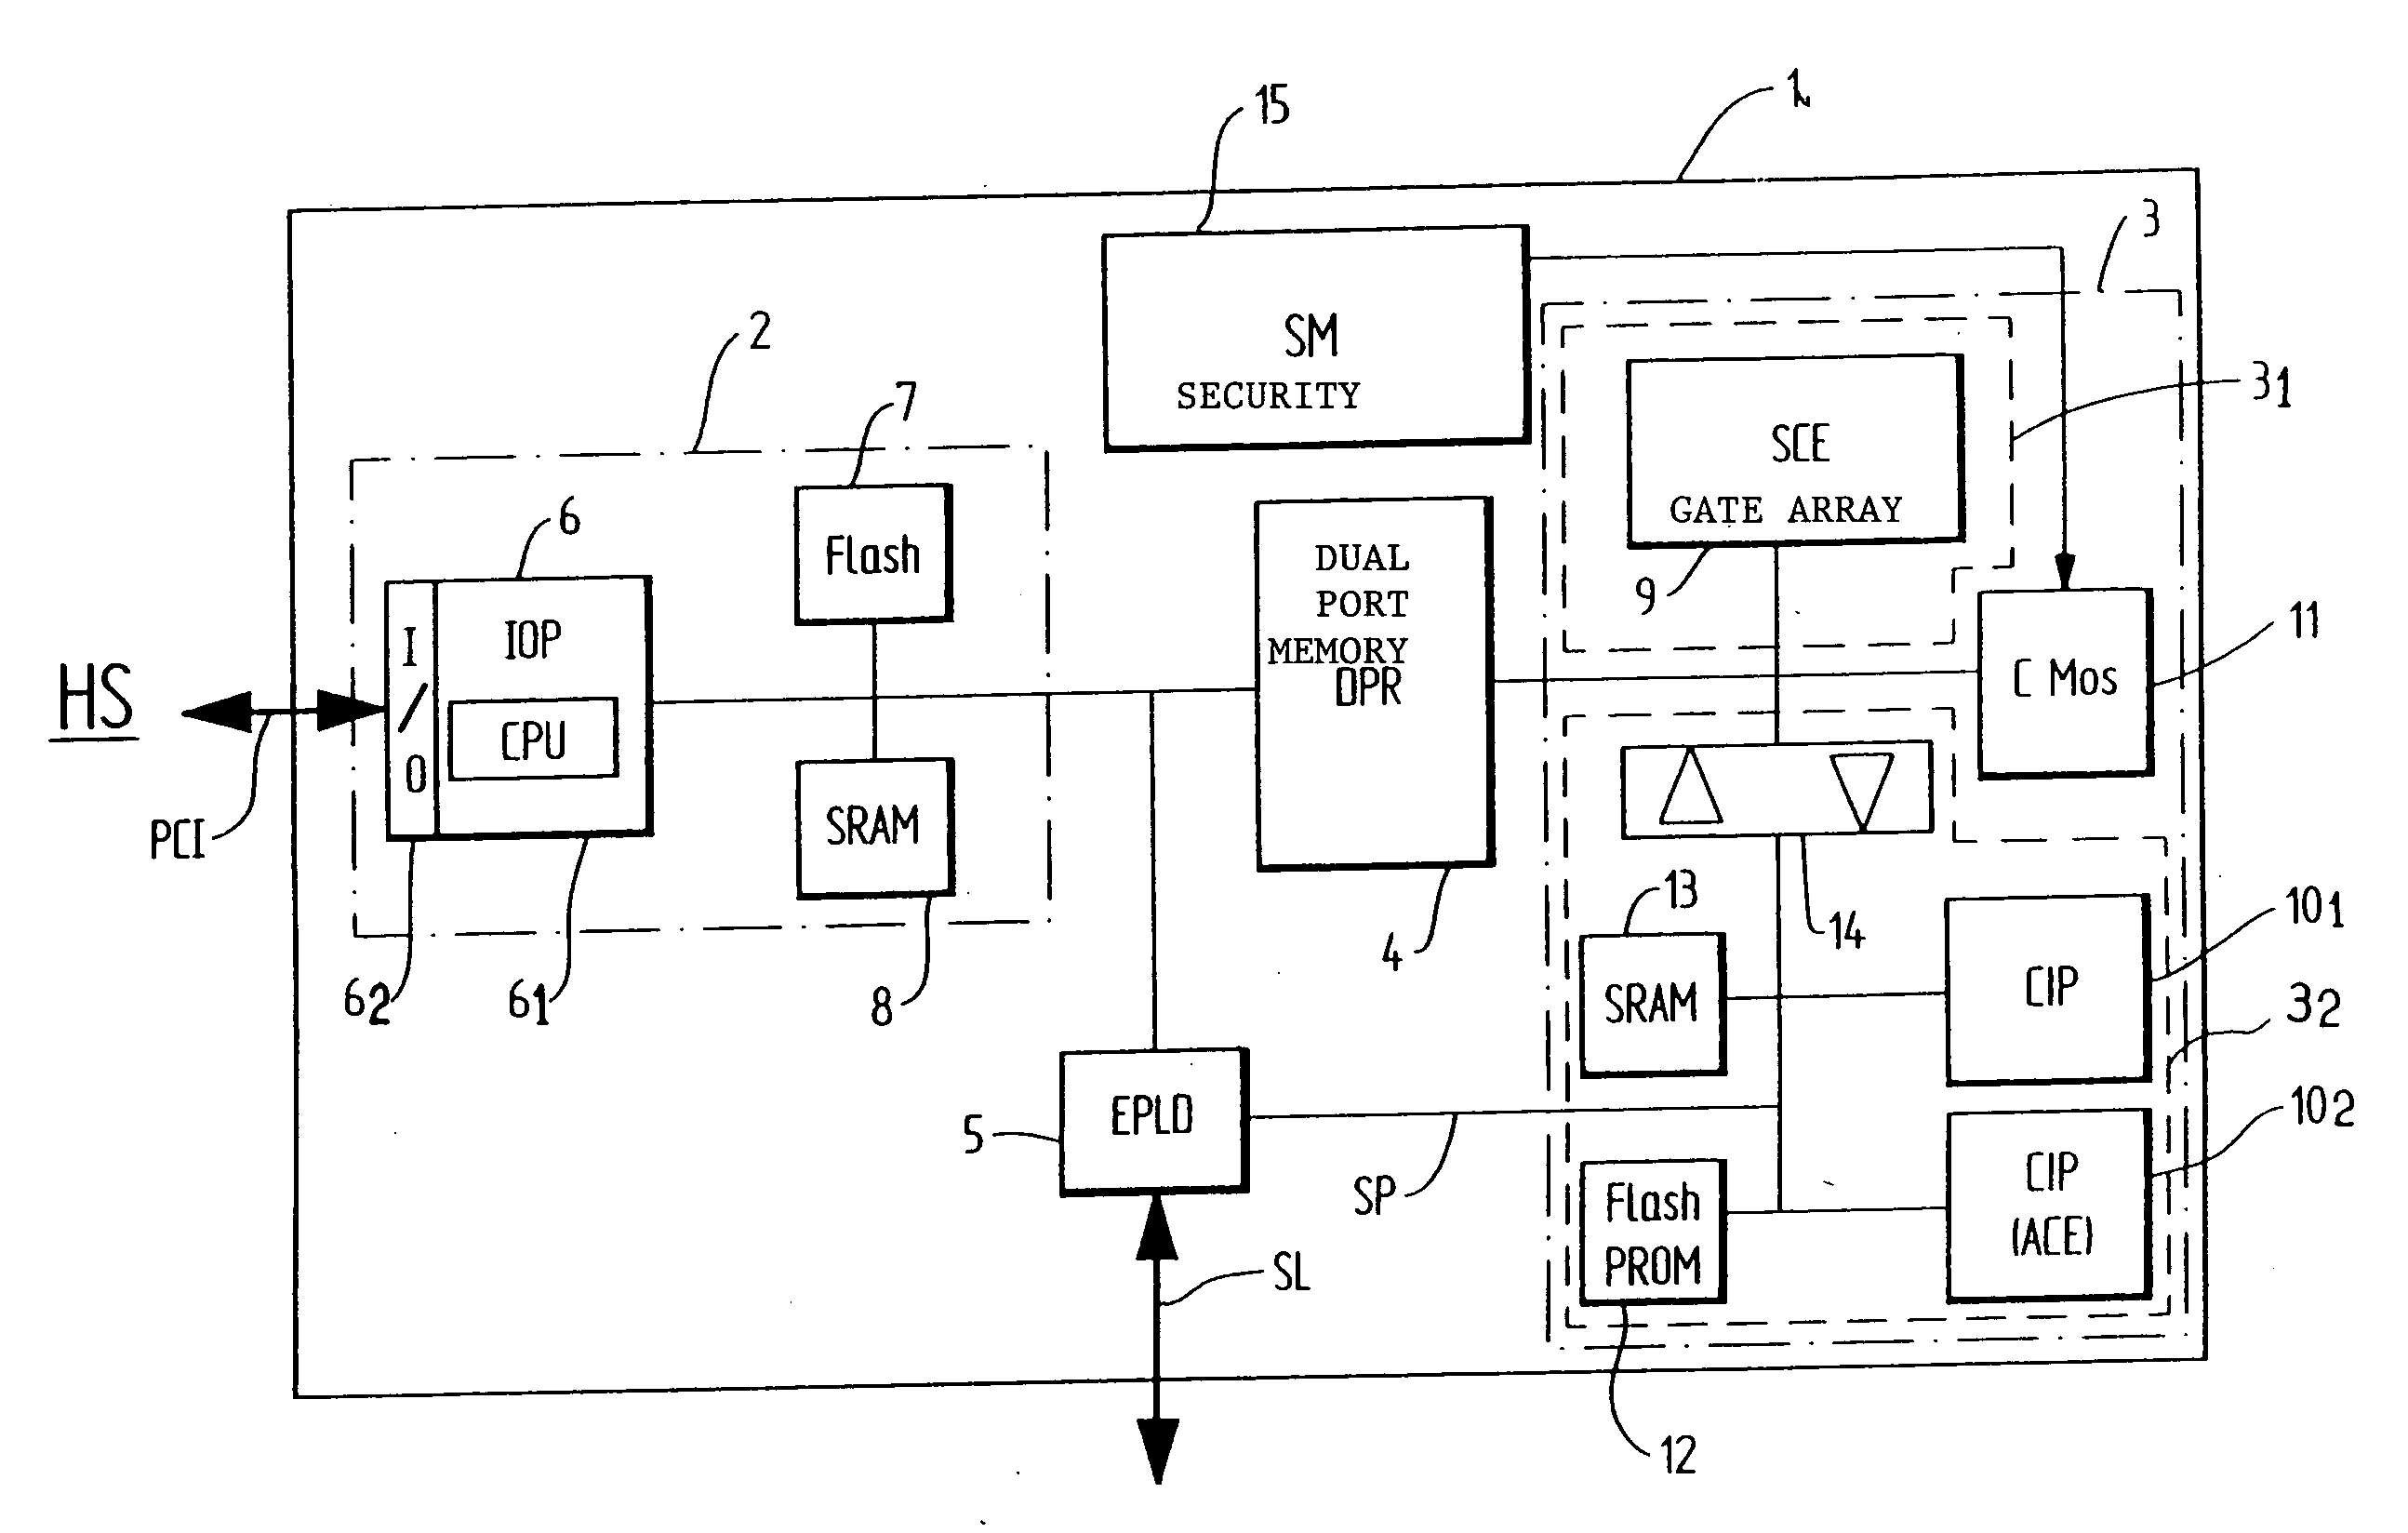 Architecture of an encryption circuit implementing various types of encryption algorithms simultaneously without a loss of performance